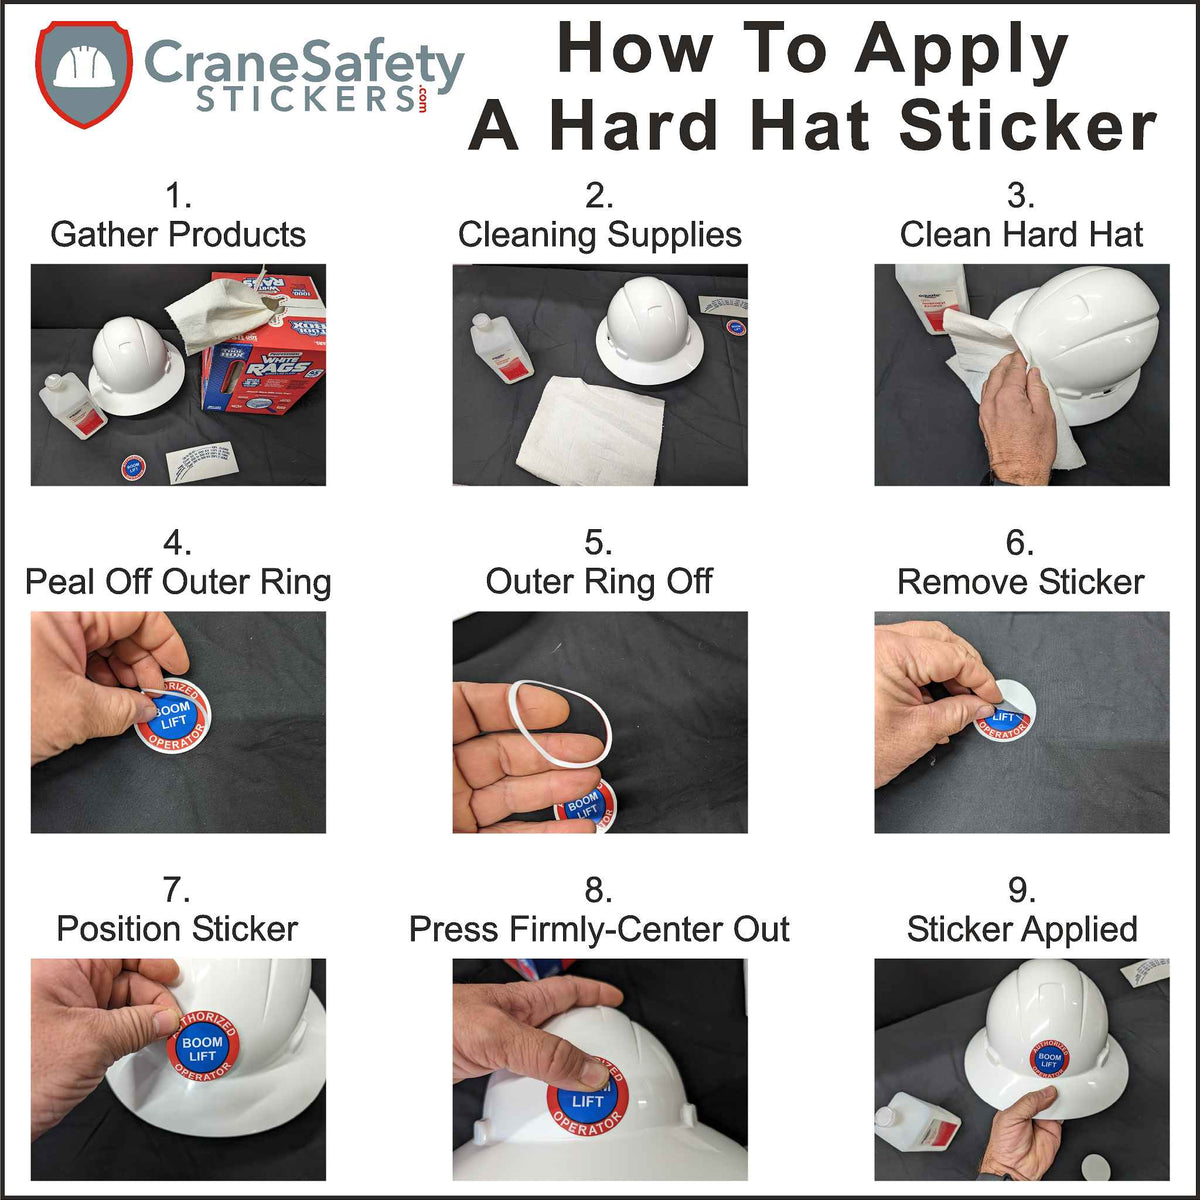 How To Apply Our Paramedic Team Sticker To A Hard Hat.